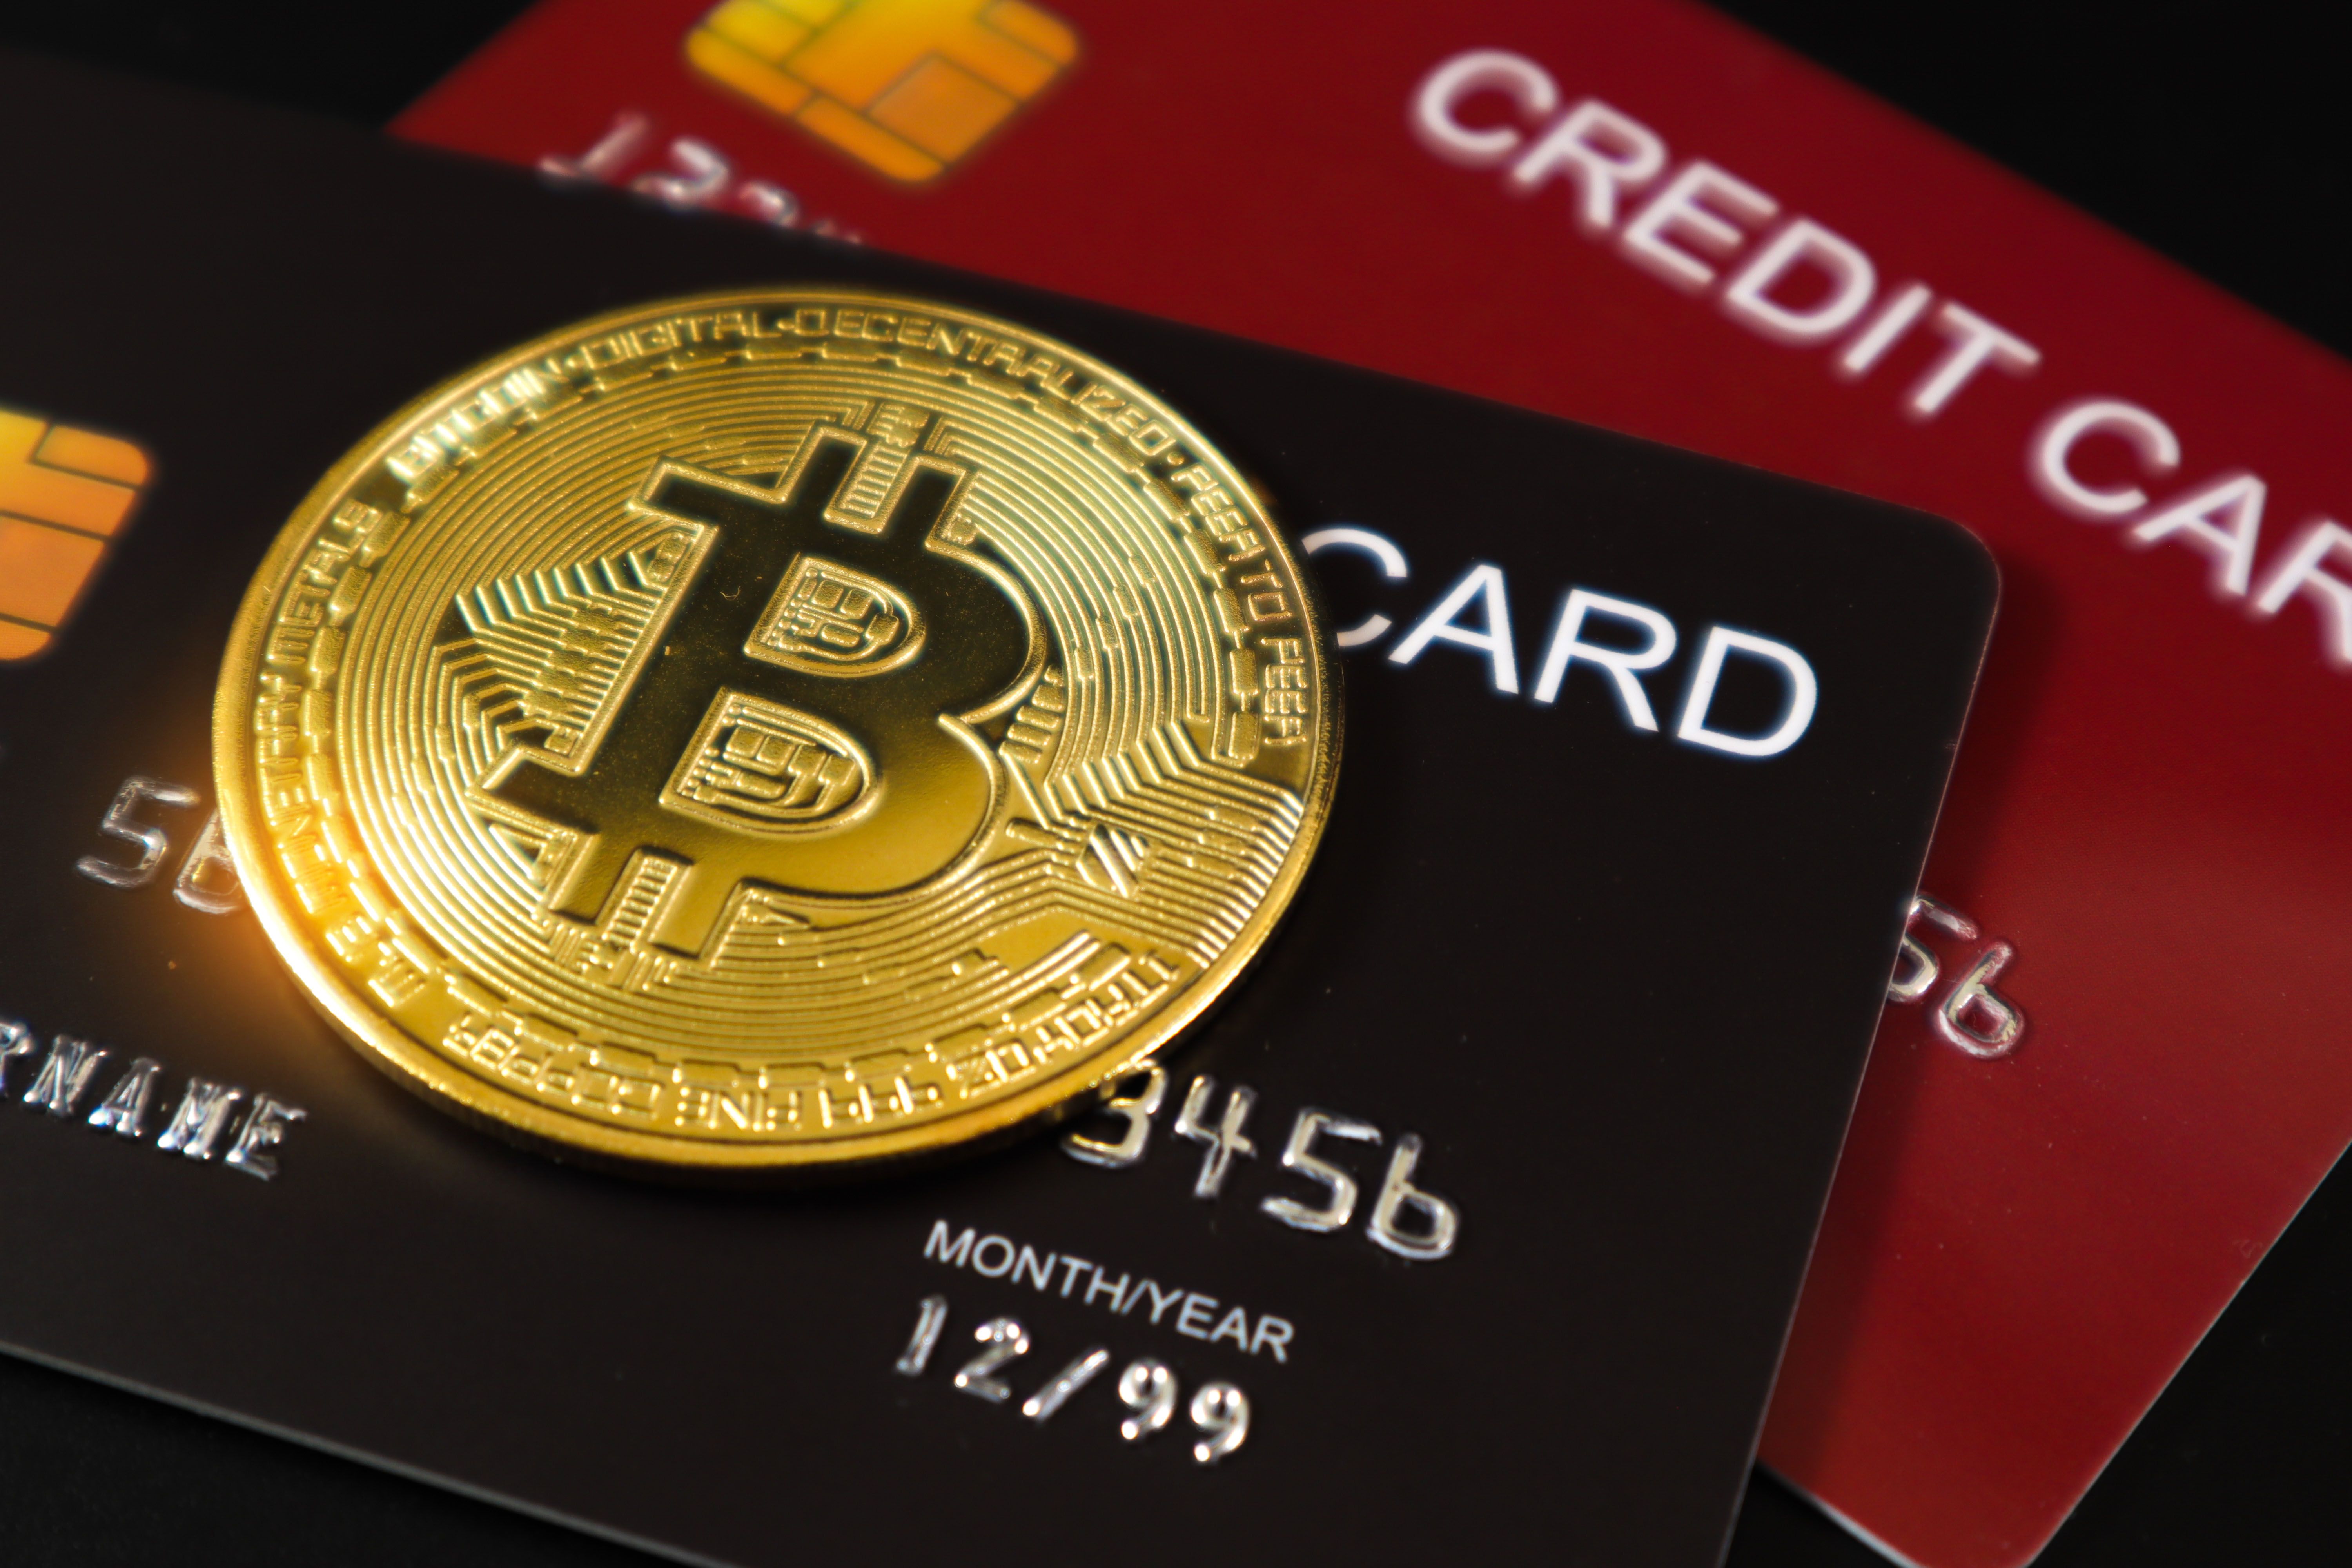 Buy Crypto with Credit & Debit Card Instantly Online | TRASTRA